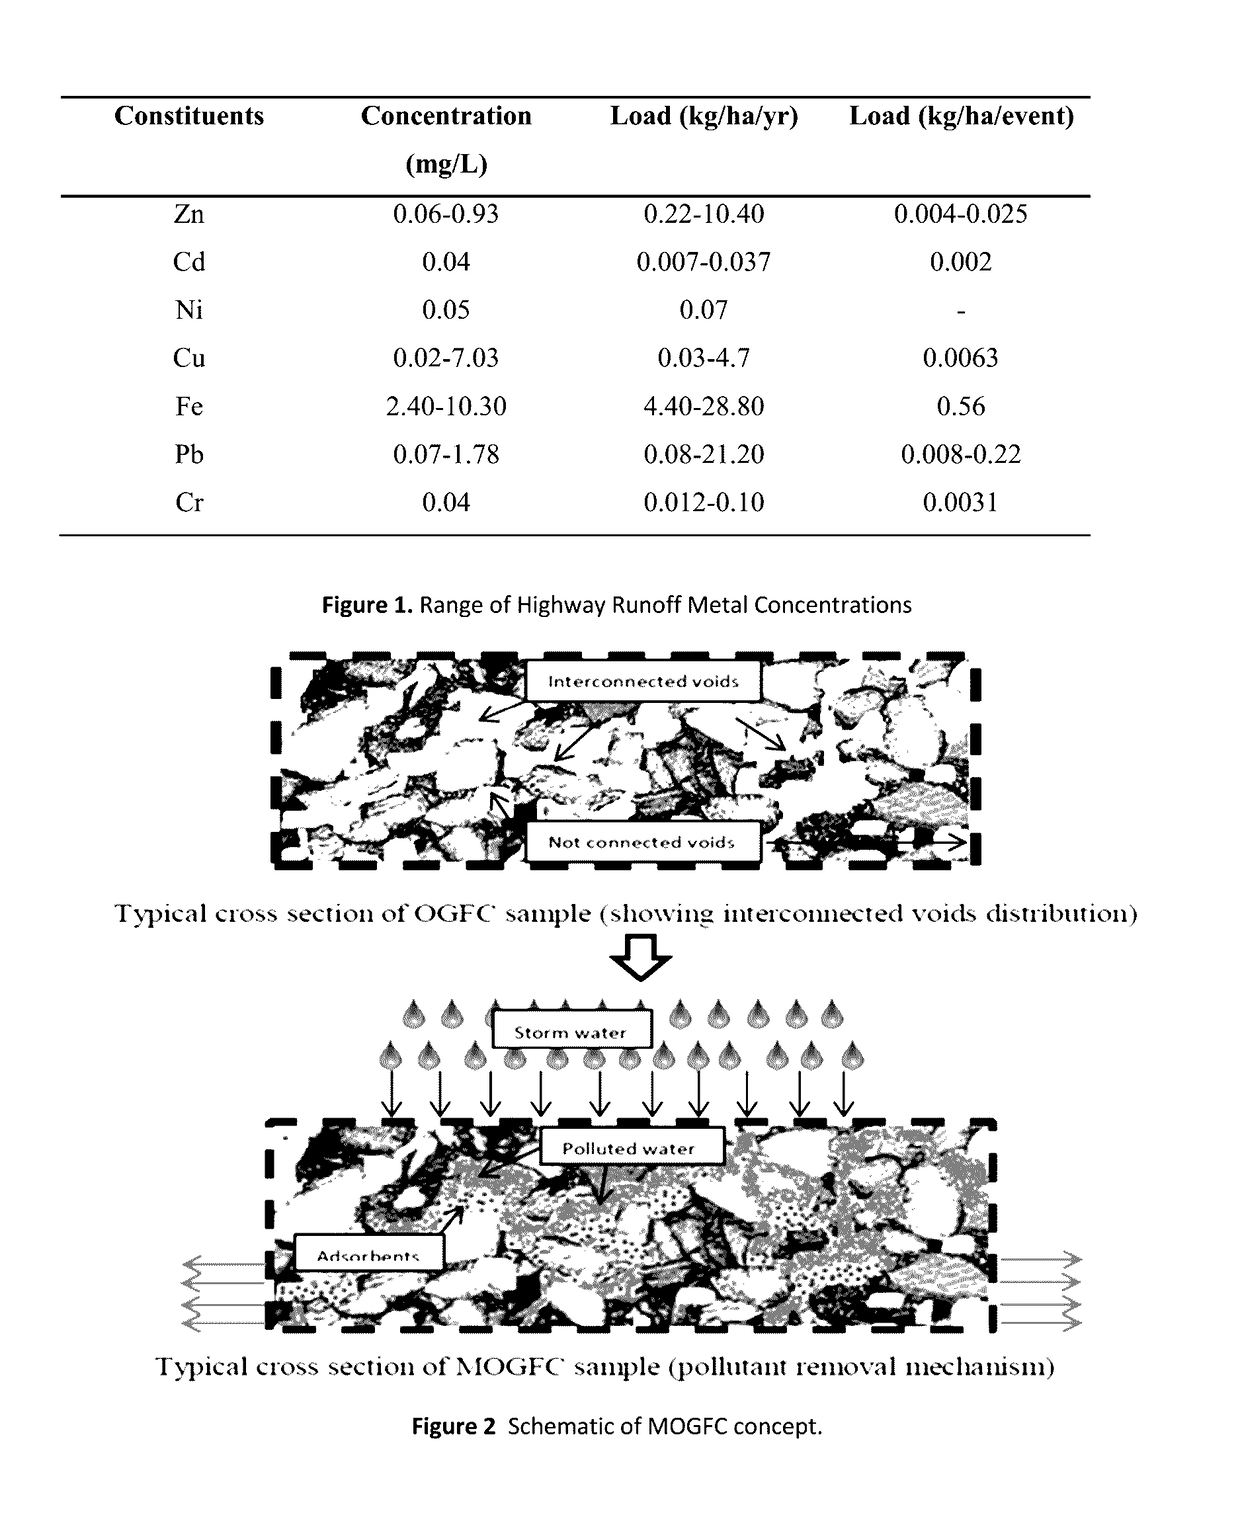 Multi-functional open graded friction course for in situ treatment of highway or roadway runoff